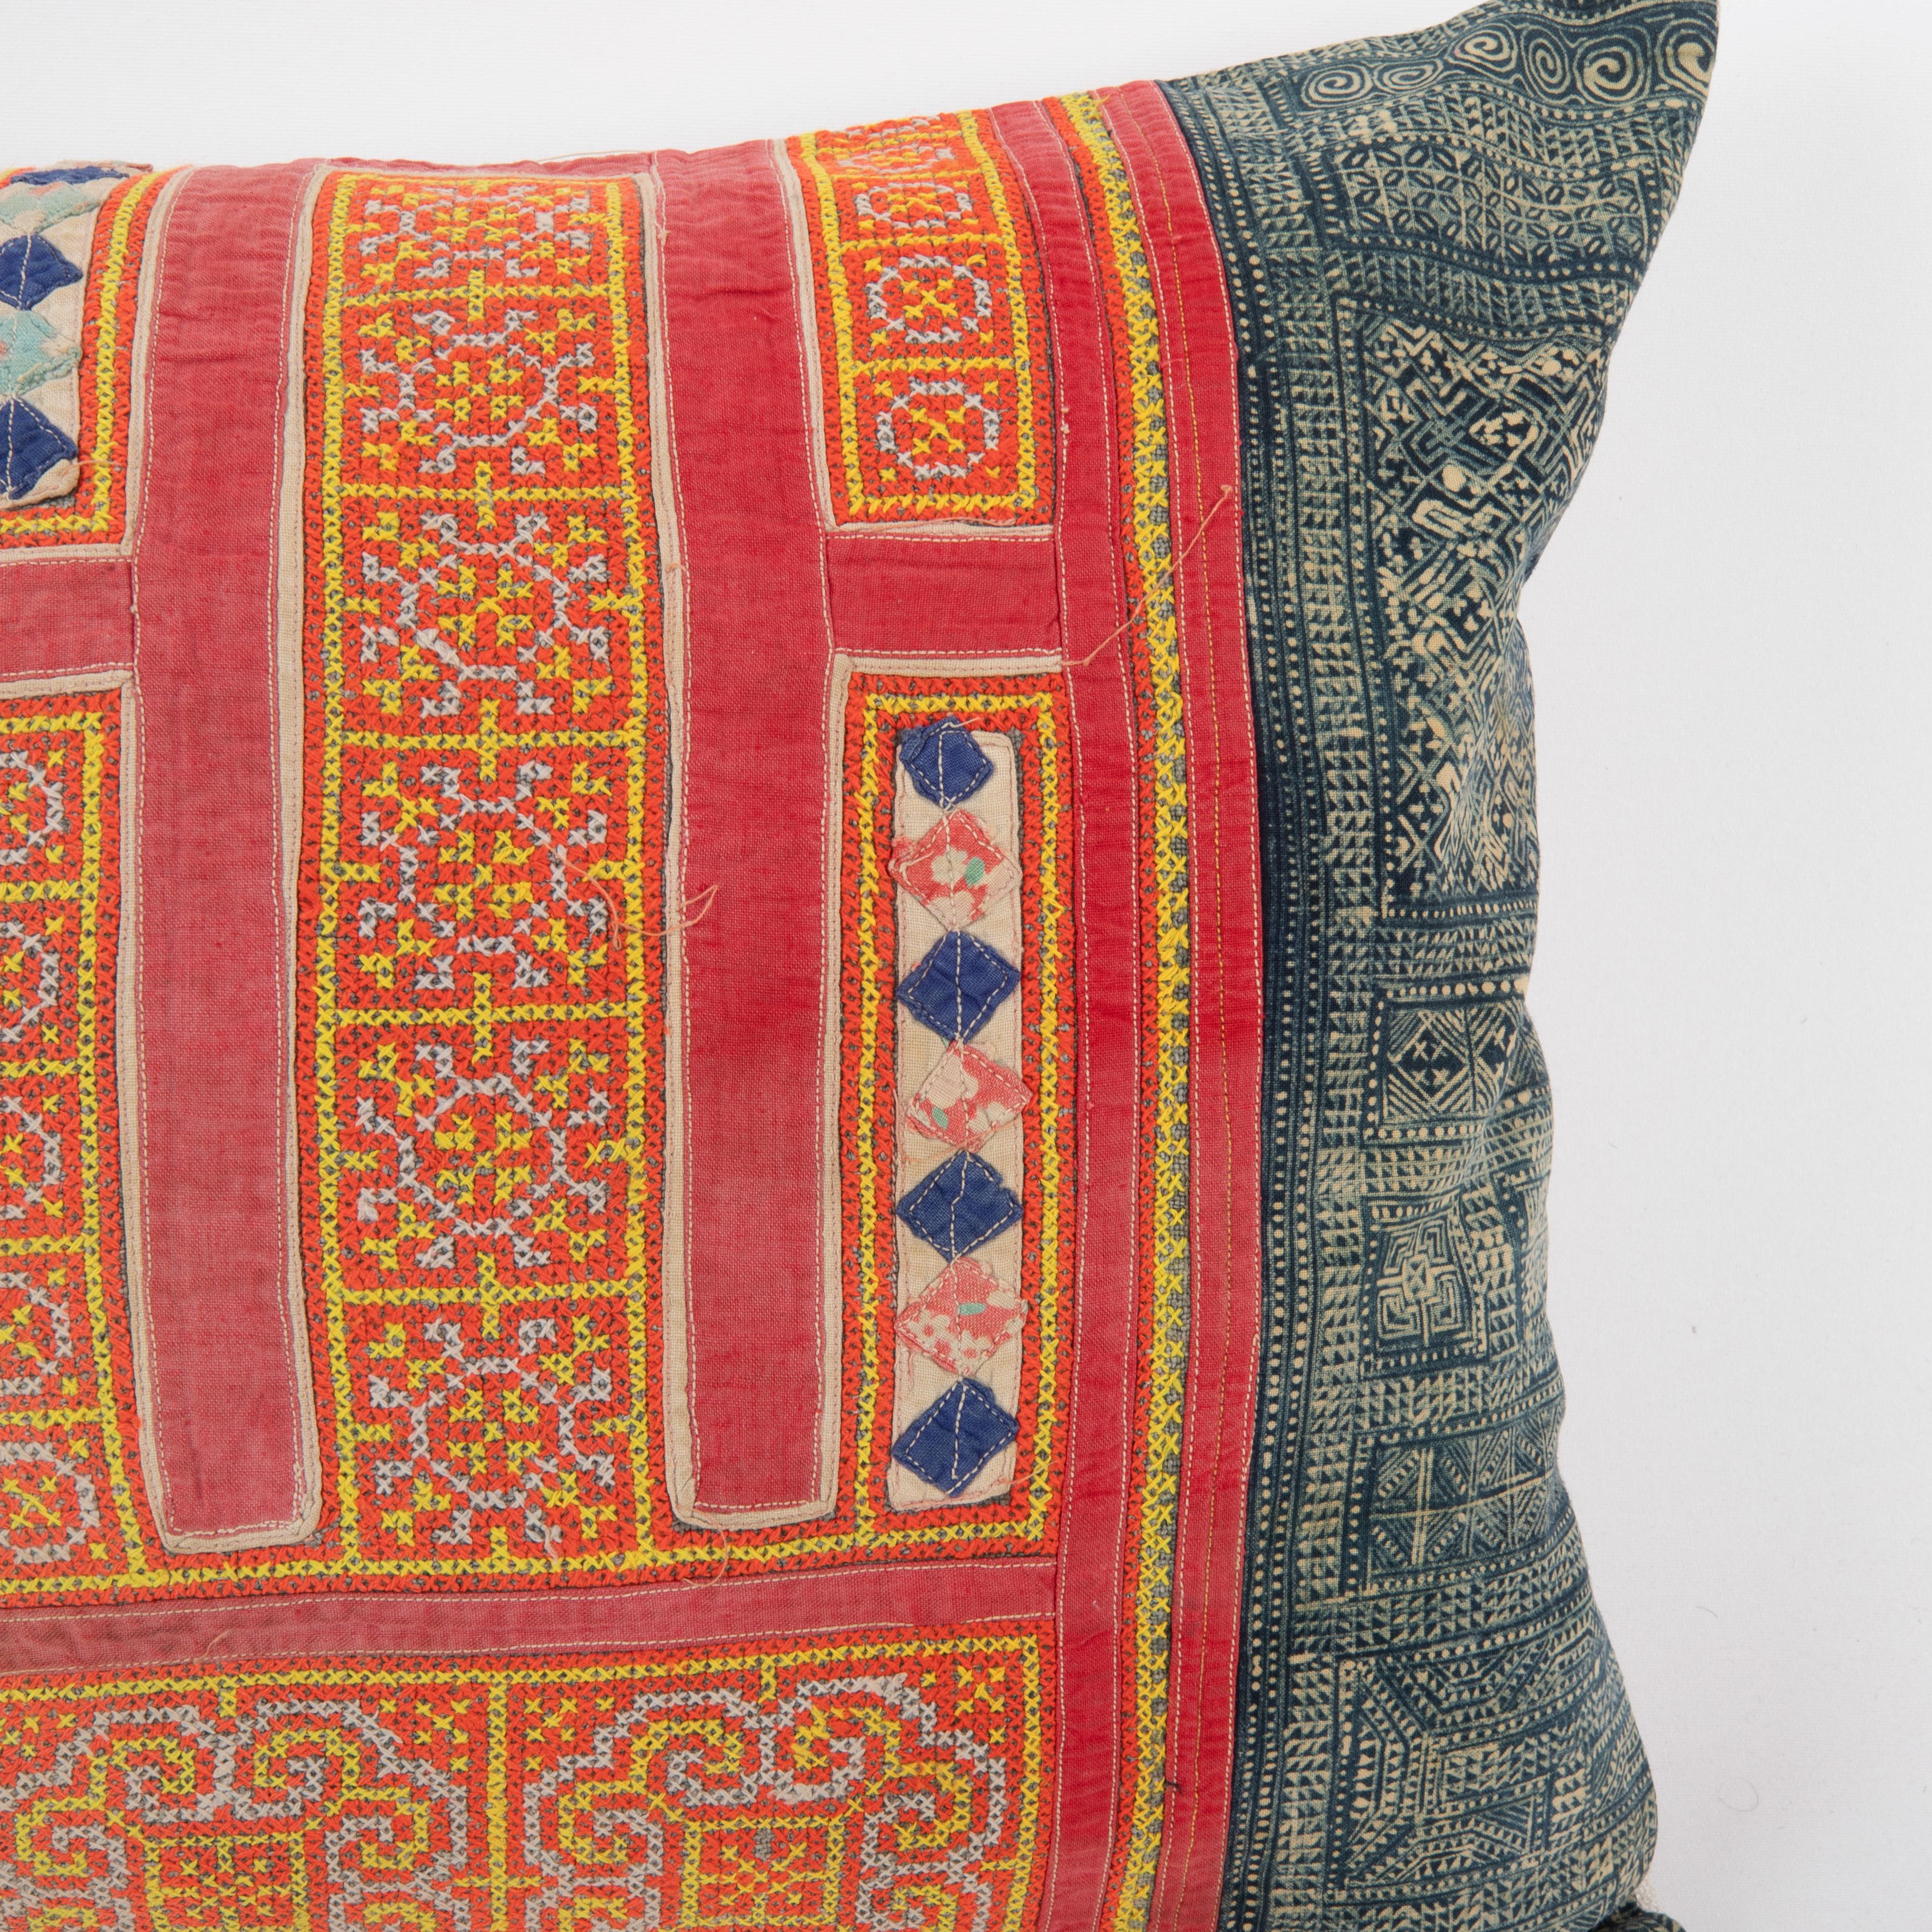 Cotton Pillow Case Made from Hmong Hill Tribe Batik Textile Mid 20th C